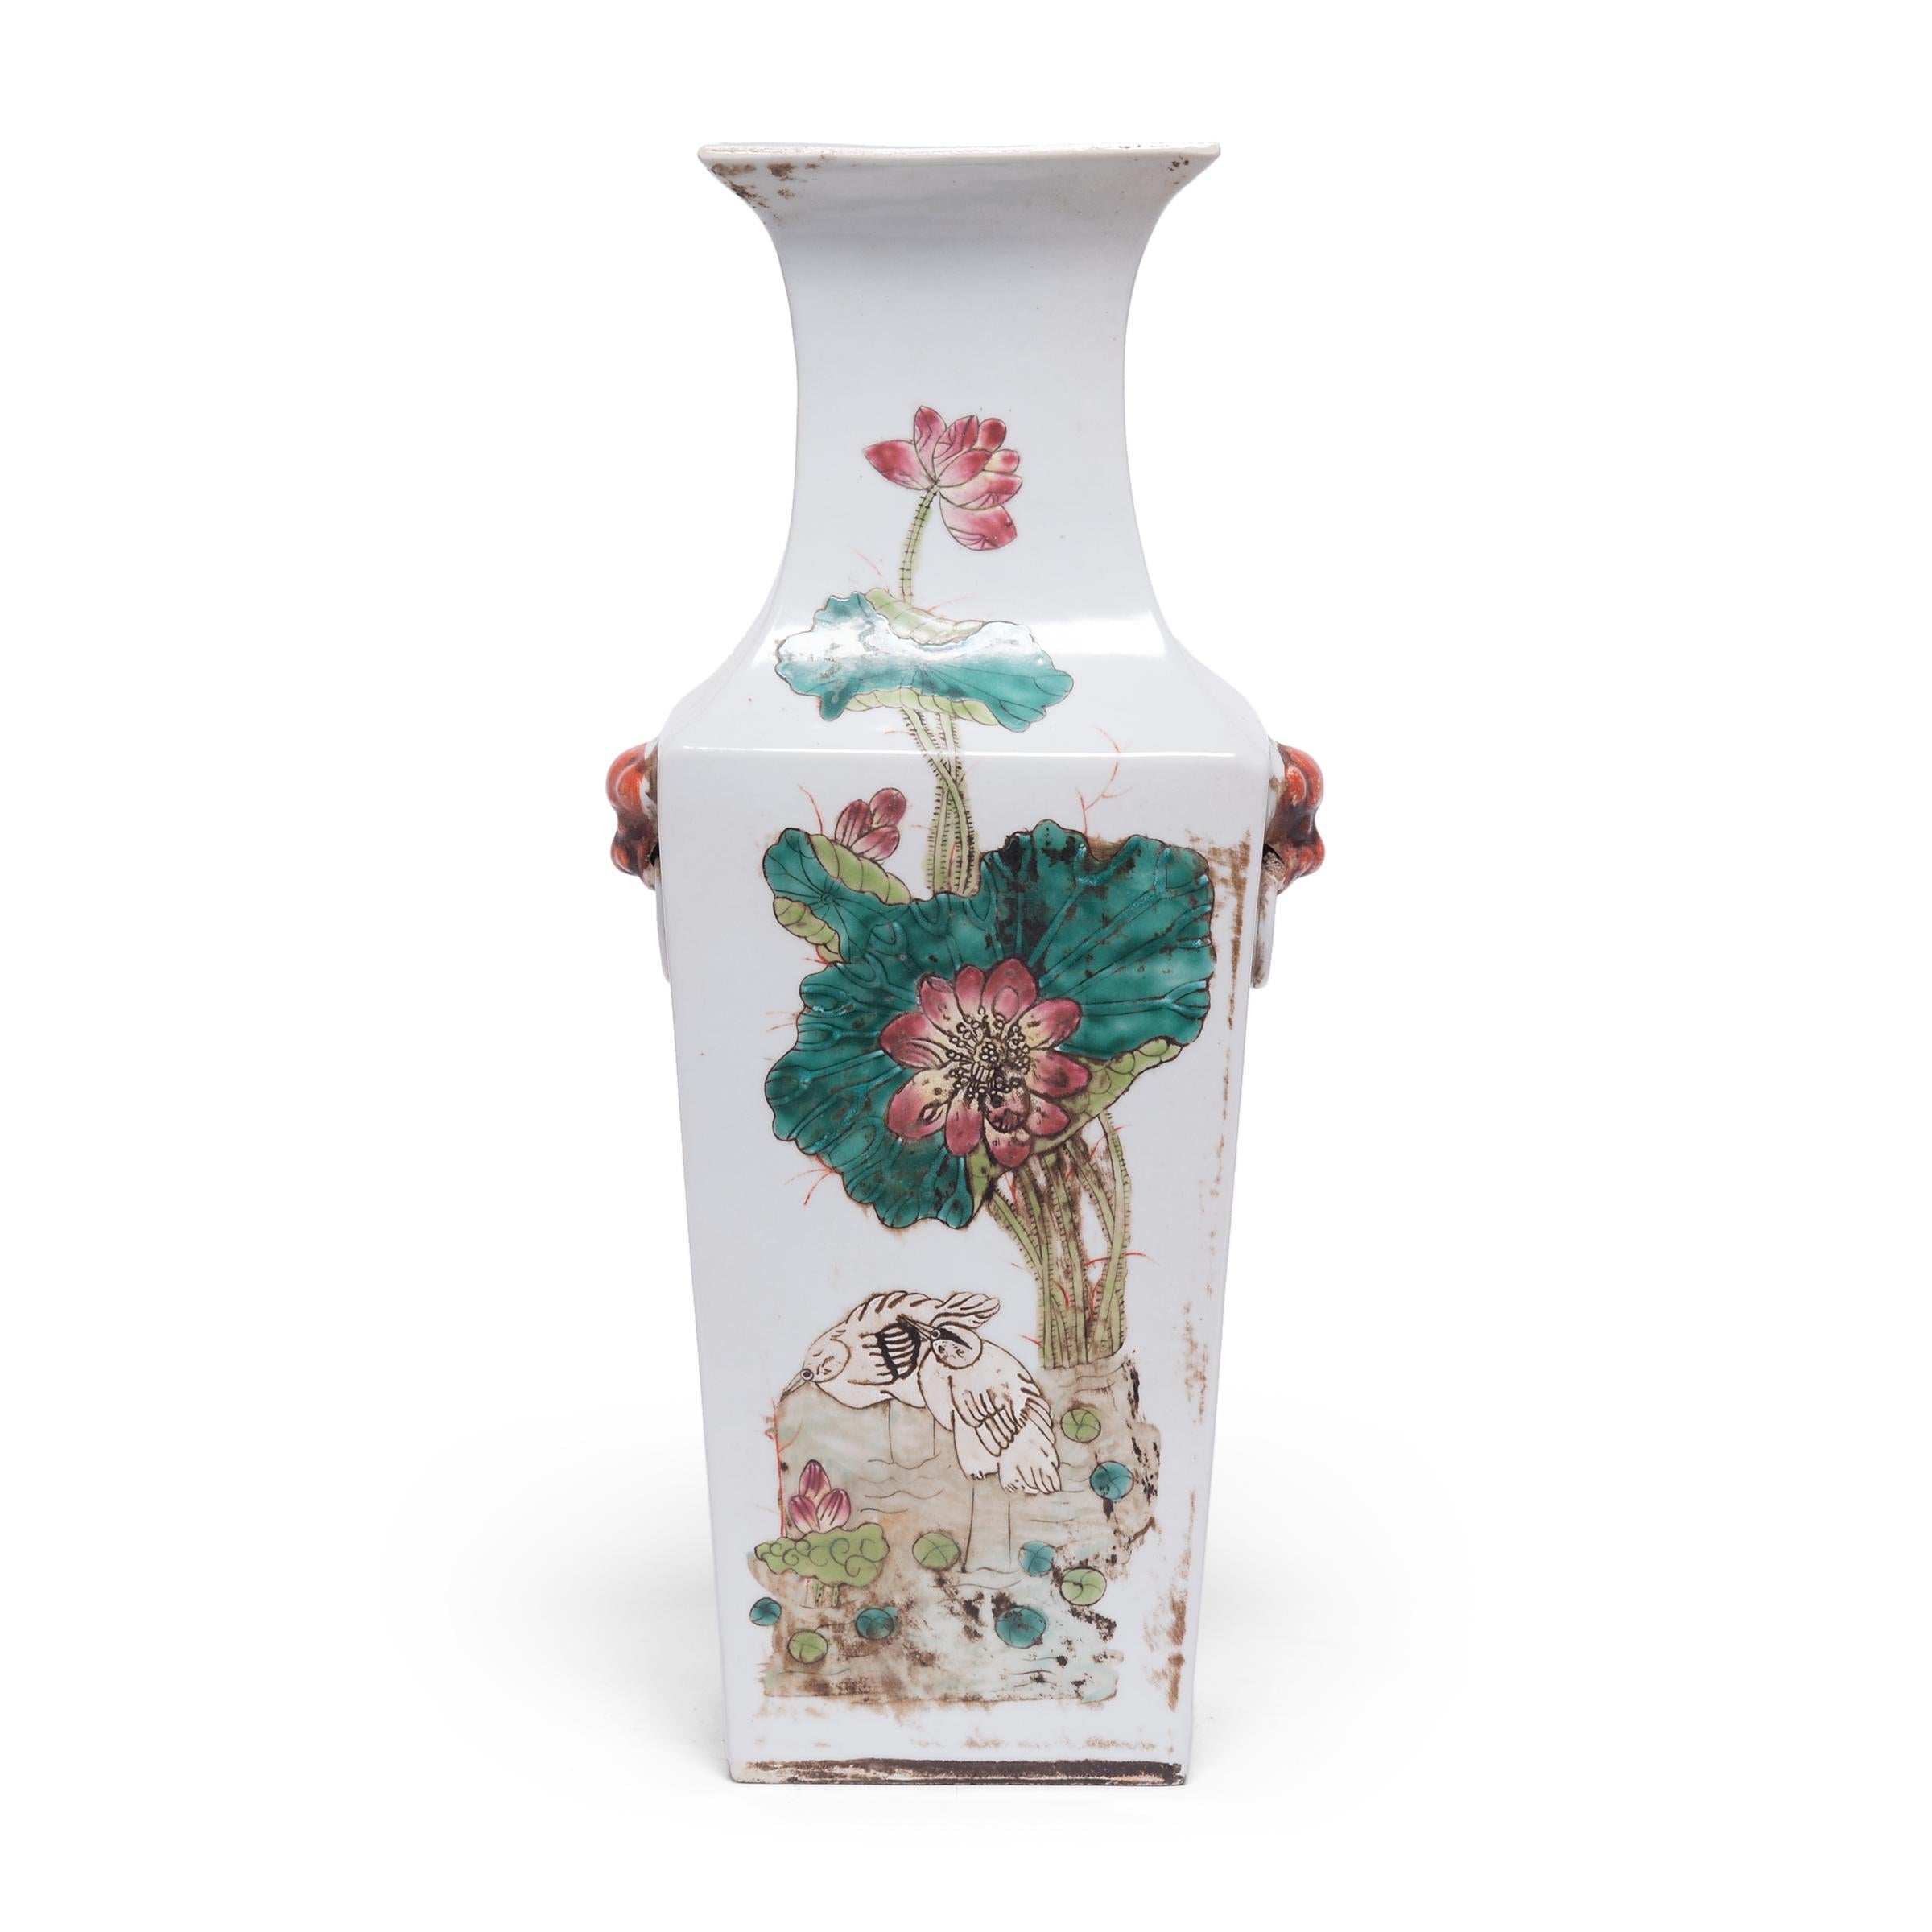 Defined by angular shoulders and a flared lip, this pair of tall porcelain vases offer a charming variation of the classic Chinese phoenix-tail vase form. Each vase is patterned with beautifully scripted poetry and enameled scenes of two egrets